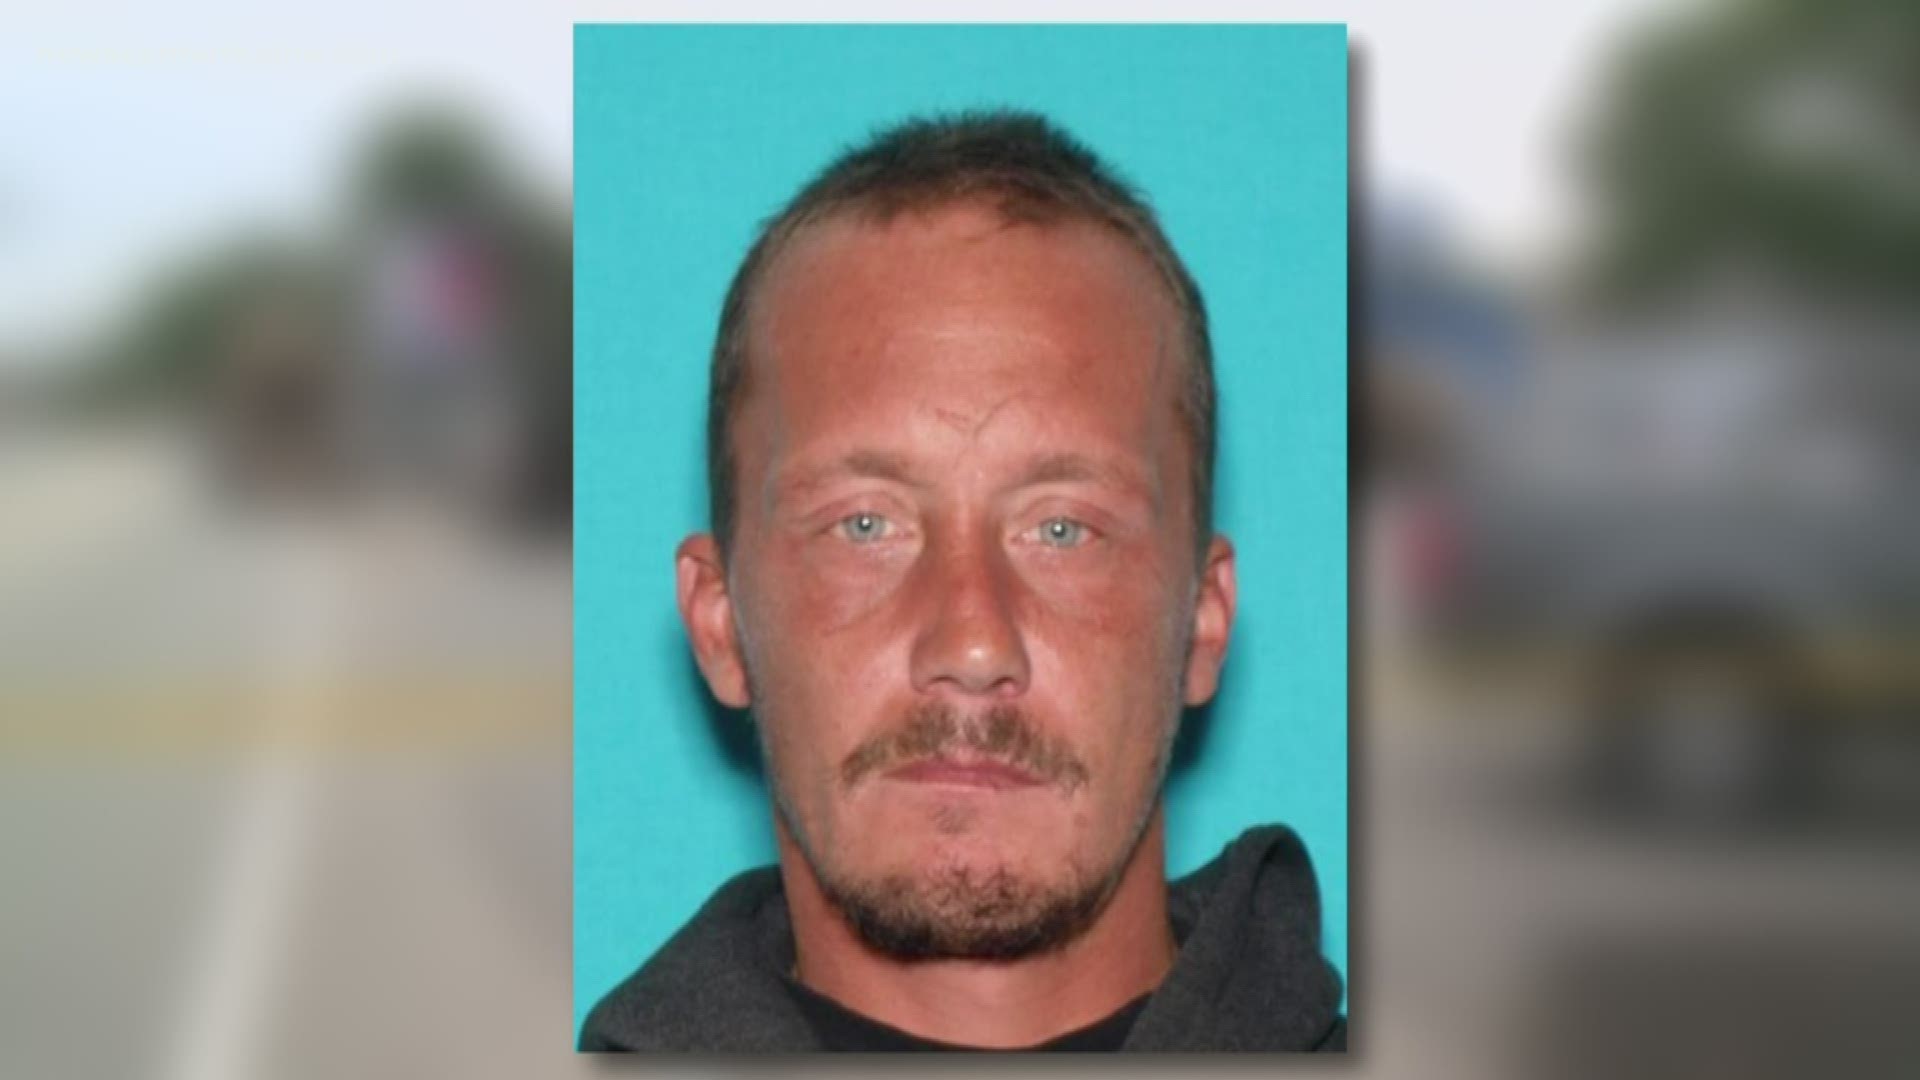 A Six-hour standoff ends with a manhunt in Saco.